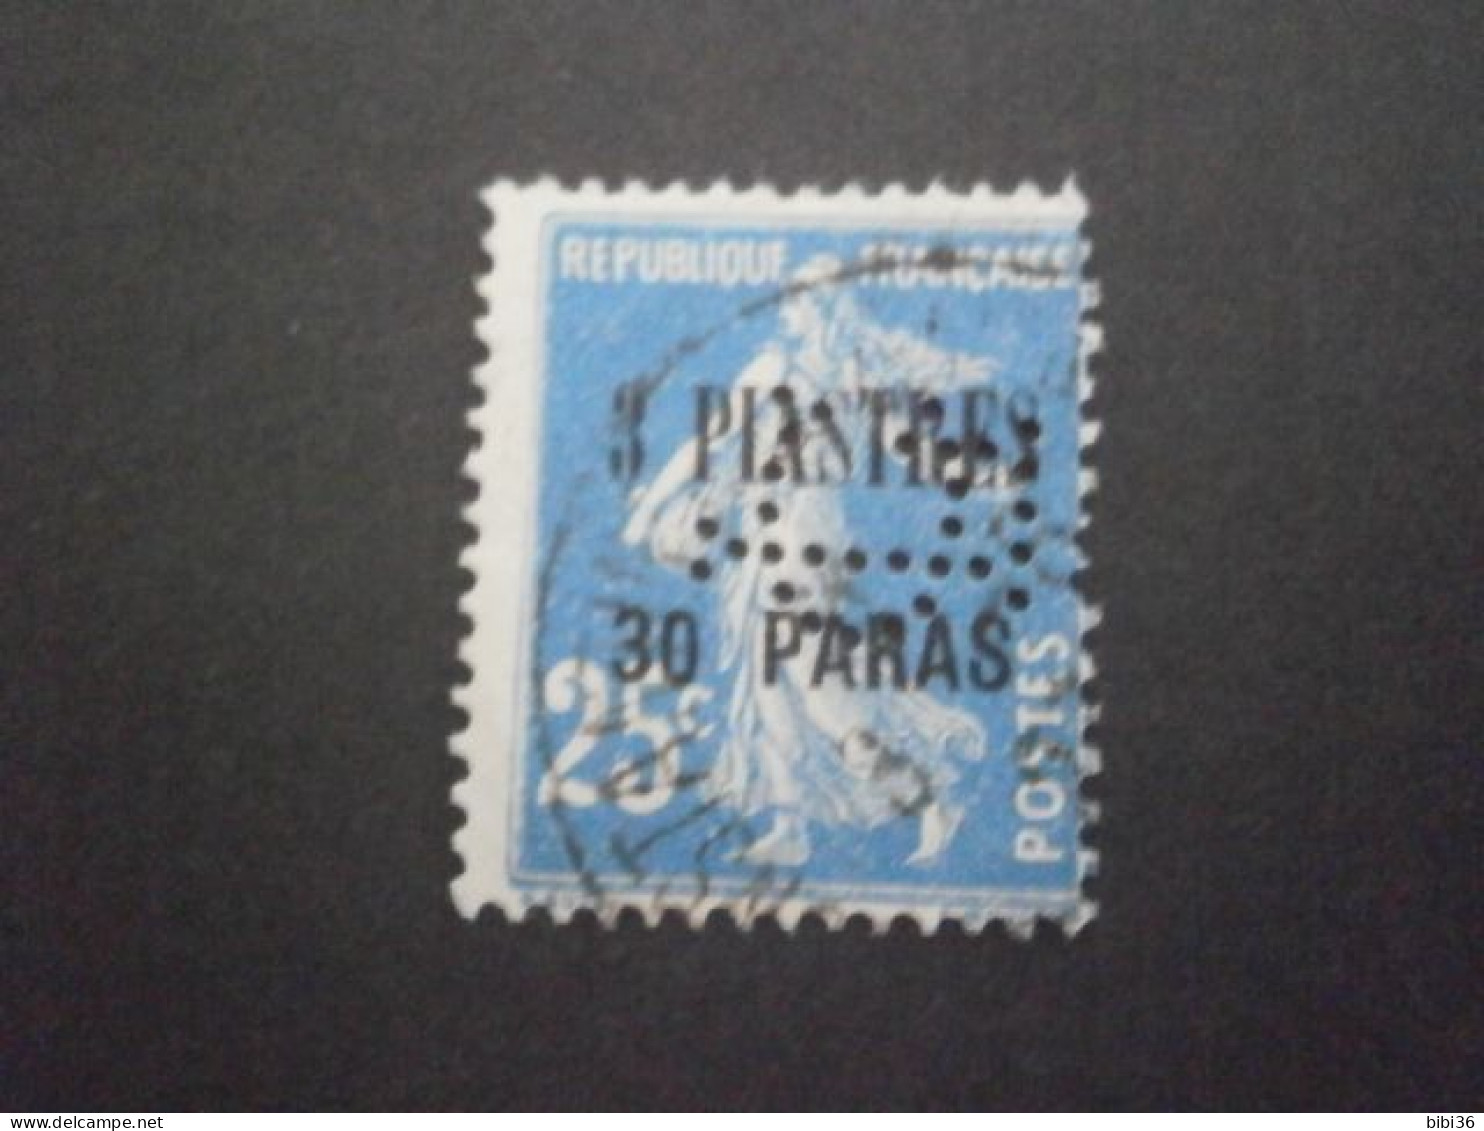 LEVANT SEMEUSE 32 CL5 PERFORATION PERFORES PERFORE PERFIN PERFINS PERFORATION PERFORIERT LOCHUNG PERCE PERFORIERT PERFO - Used Stamps